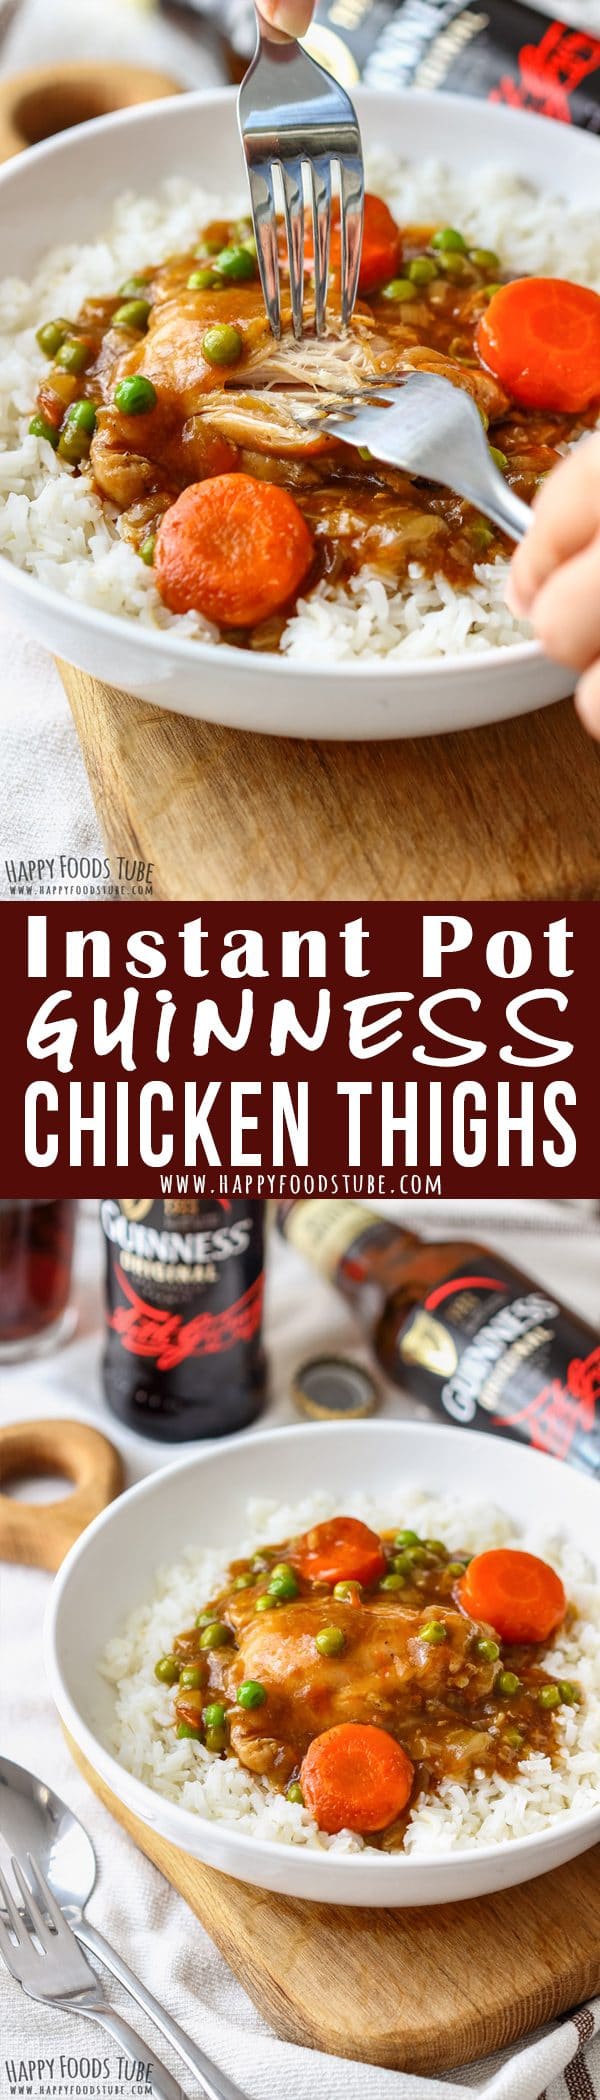 Instant Pot Guinness Chicken Thighs Picture Collage